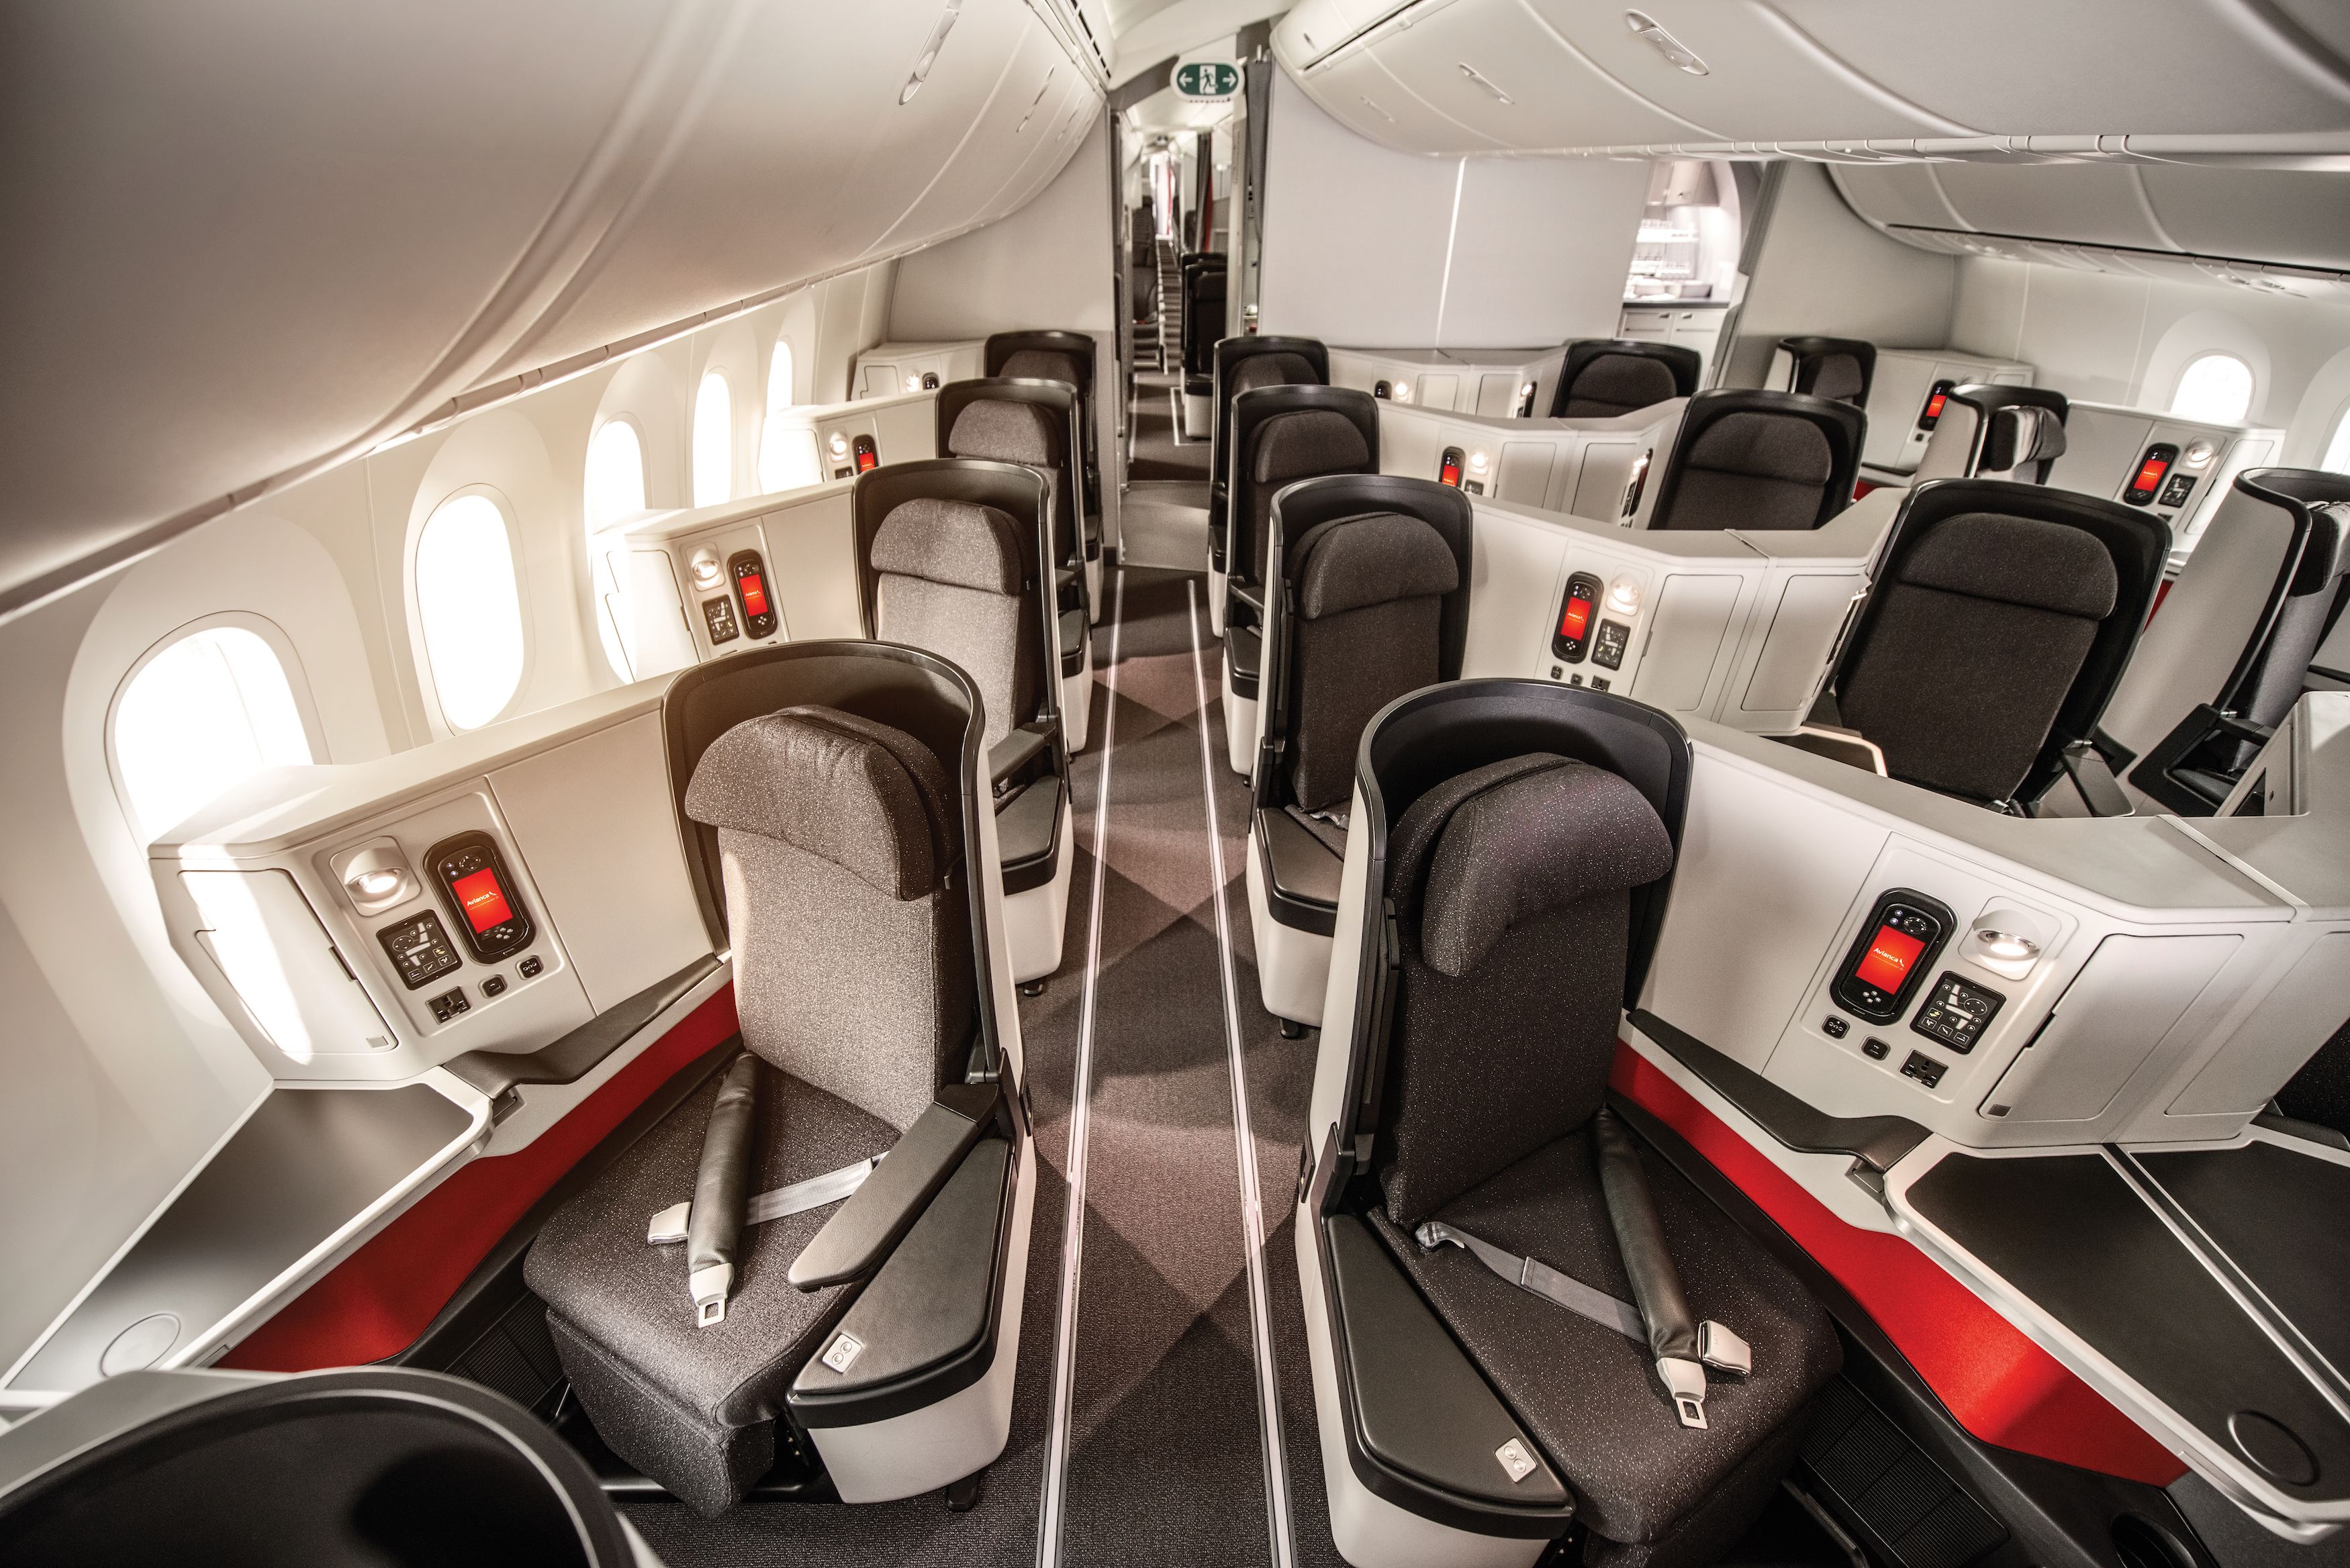 Avianca's new business class seats offered in flights between Bogota and Los Angeles